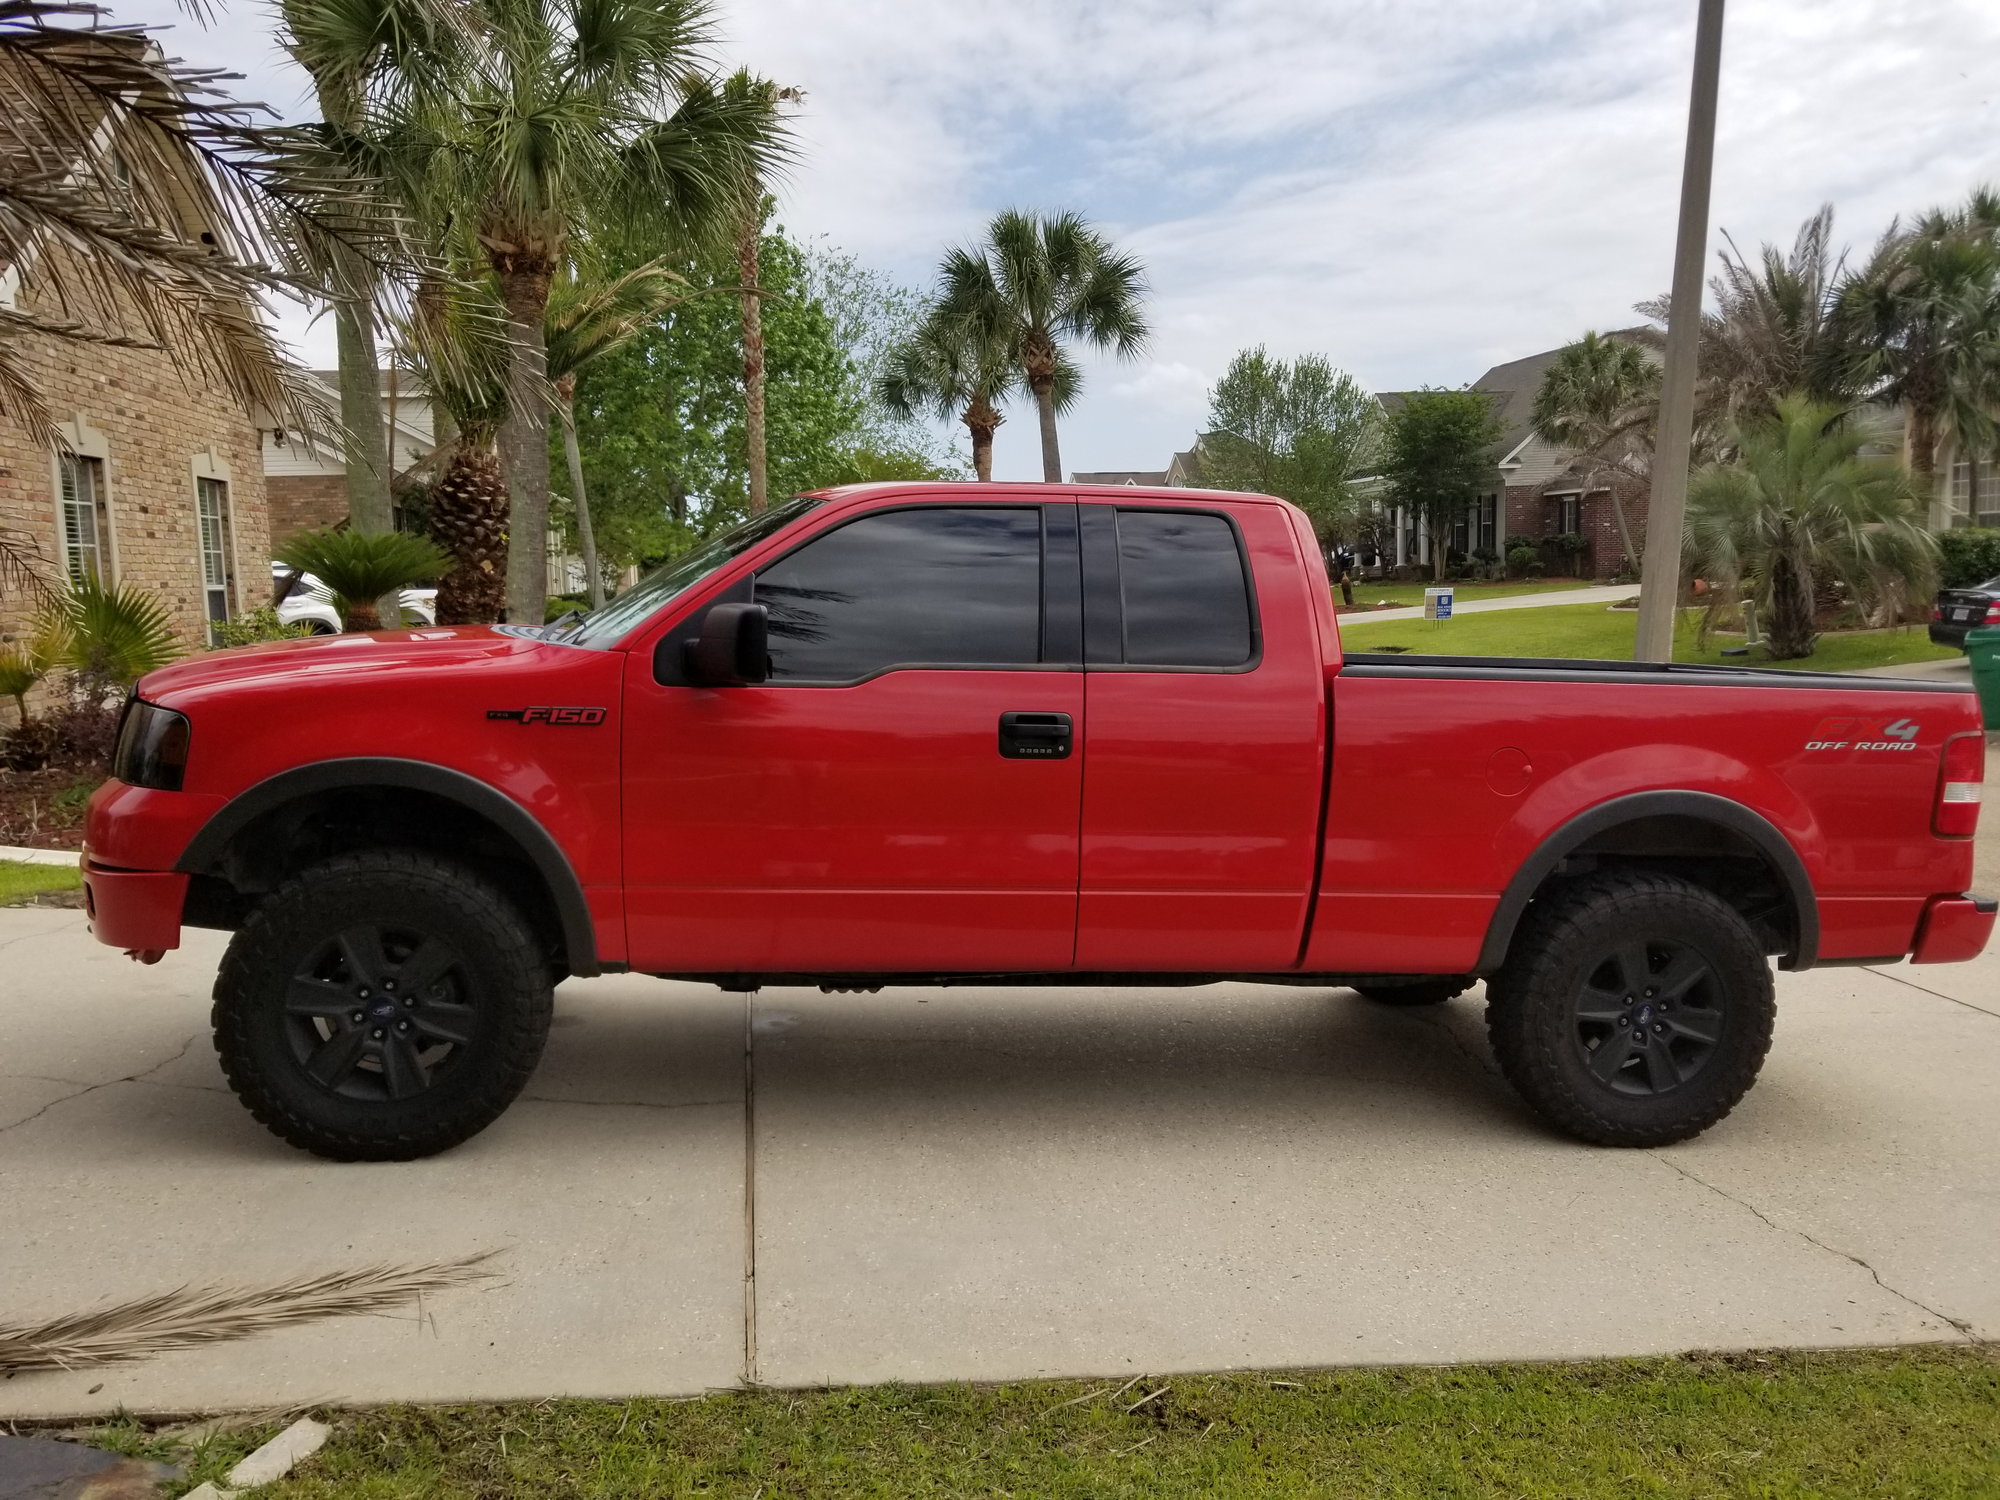 2004 Ford Fx4 F150 4x4 For Sale With 52k Original Miles